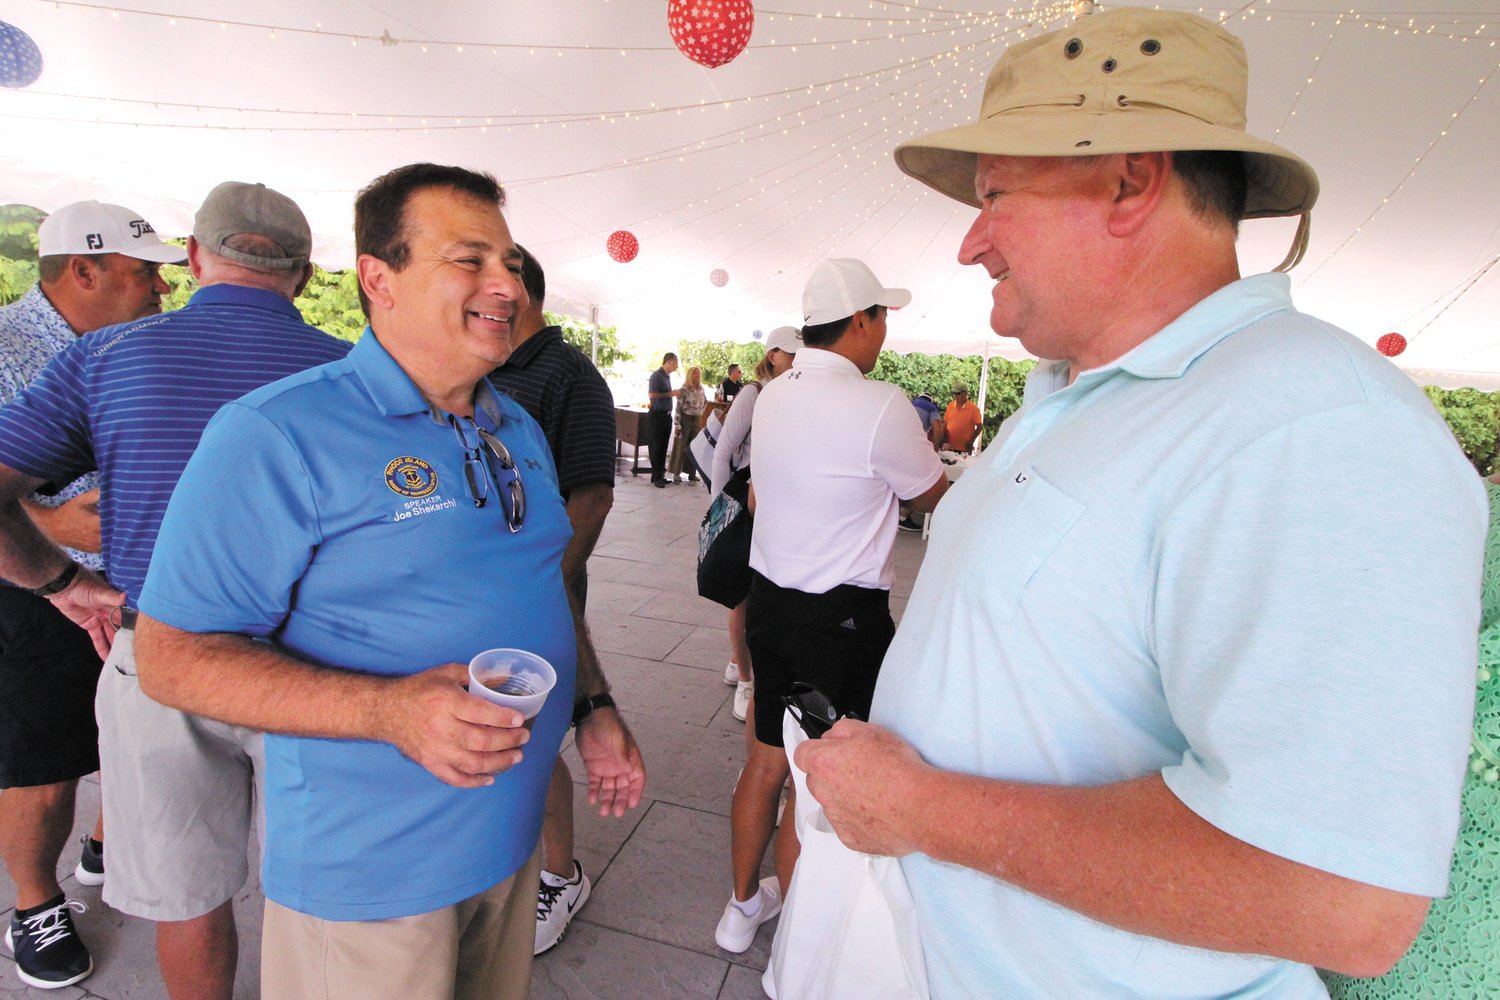 AWAY FROM THE STATE HOUSE: House Speaker K. Joseph Shekarchi and Senate Majority Leader Michael McCaffrey chat at the golf scramble benefiting Friends of the Warwick Animal Shelter and other rescue groups.